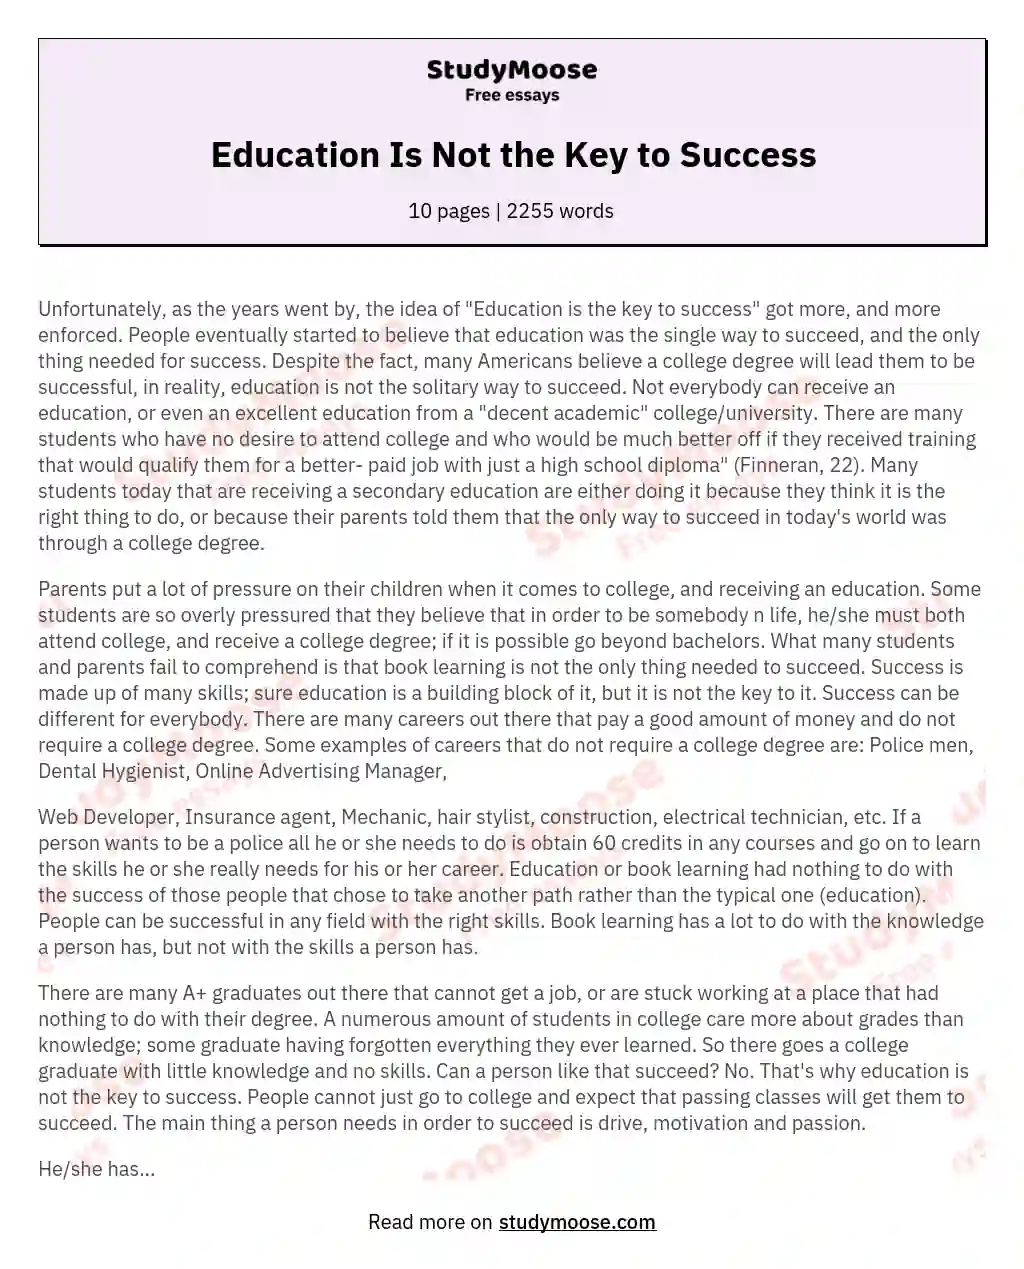 Education Is Not the Key to Success